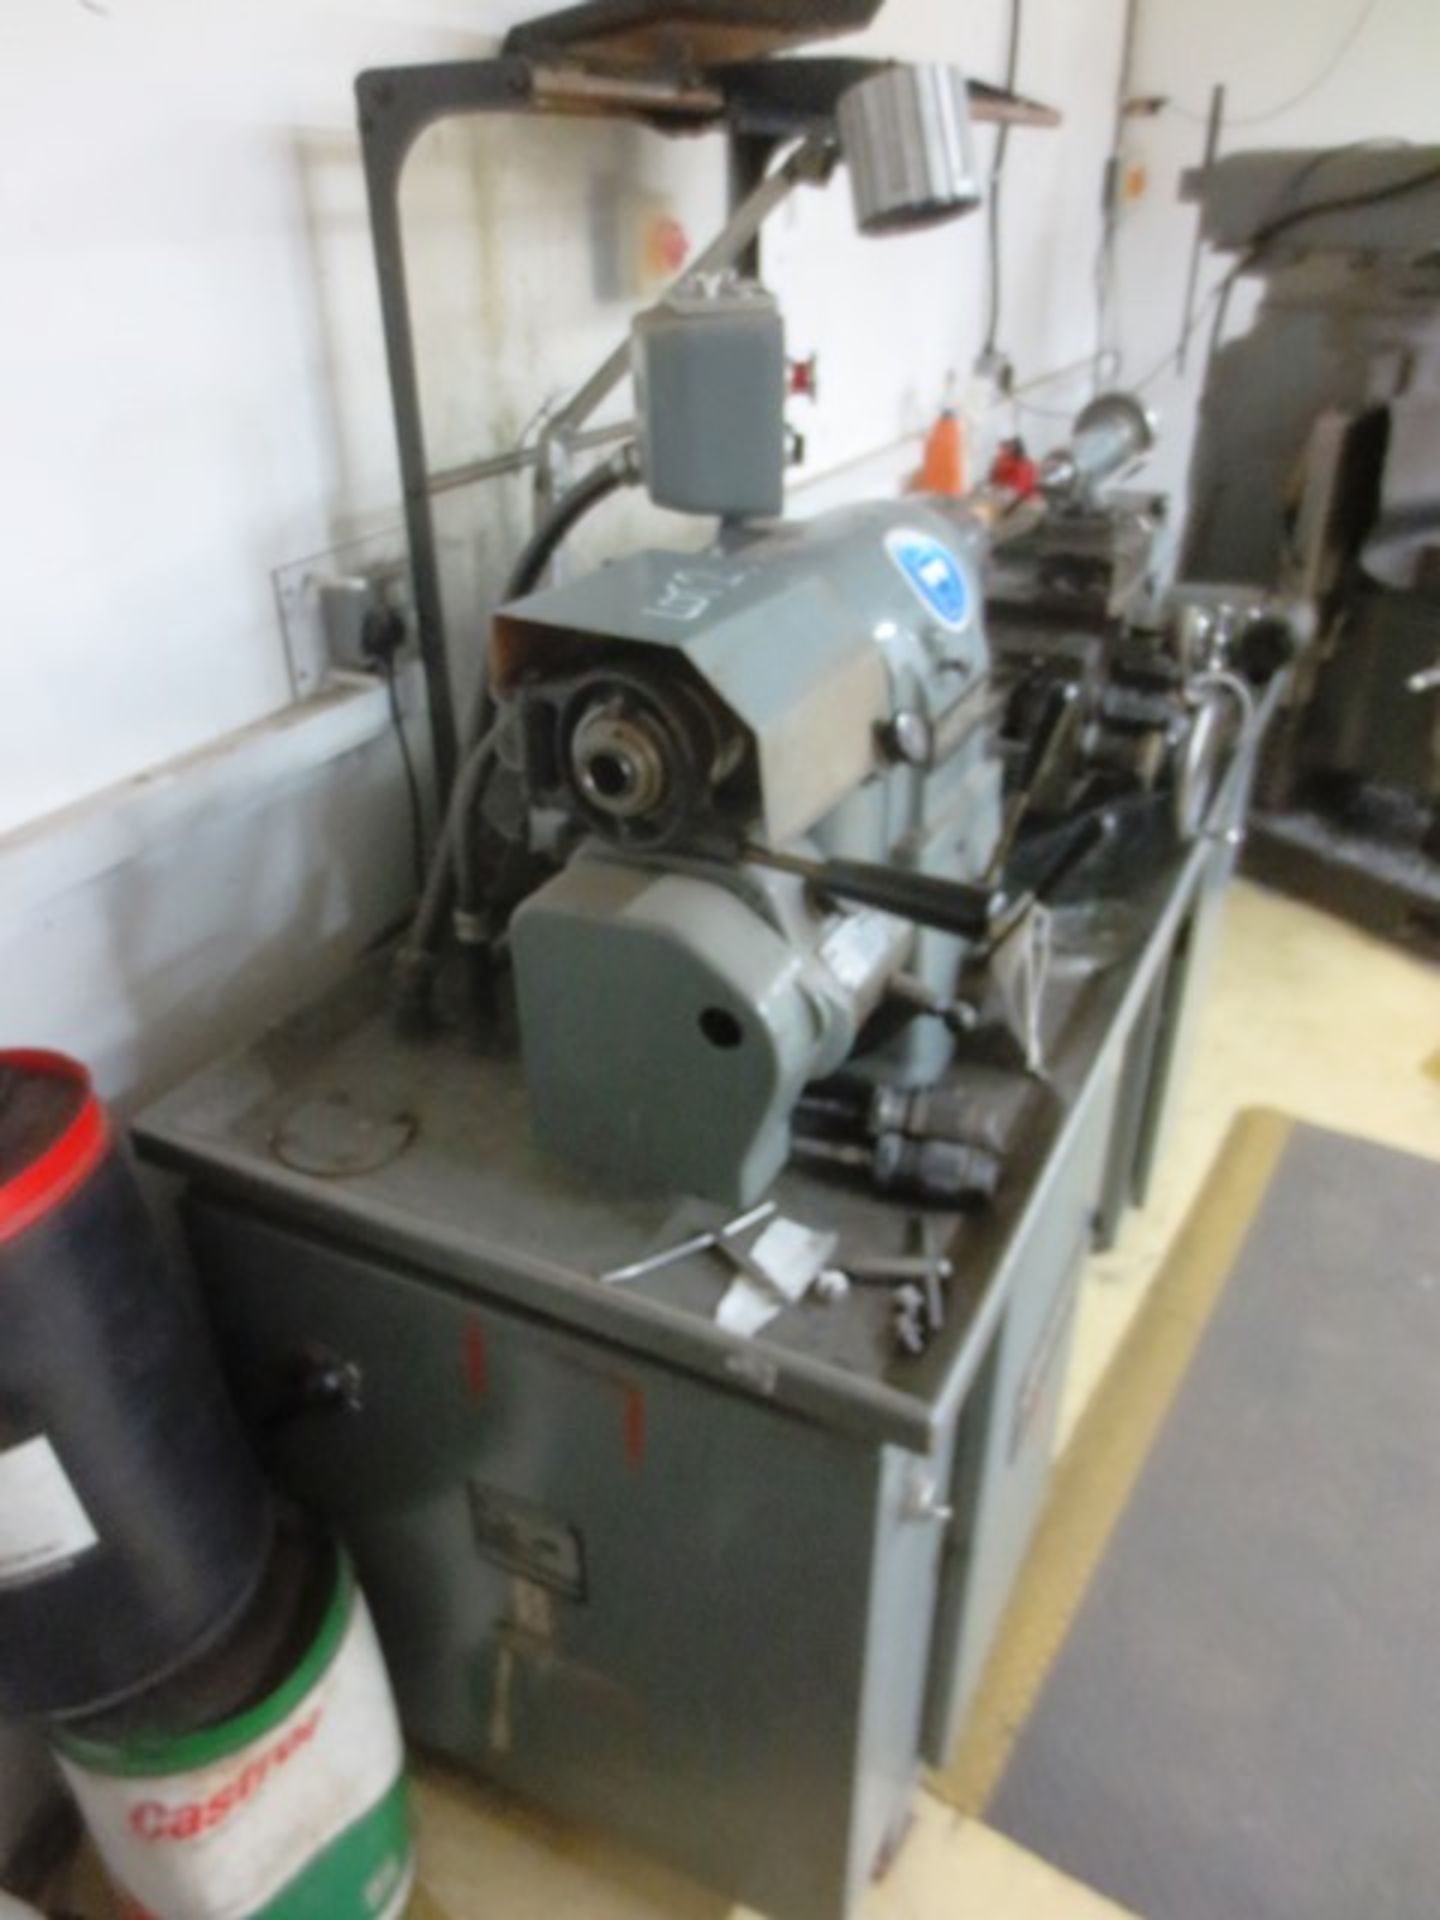 Hardinge HLV-H Precision Lathe, serial no: HLV-H-11940T, 3 phase, distance between centres: 17", - Image 3 of 5